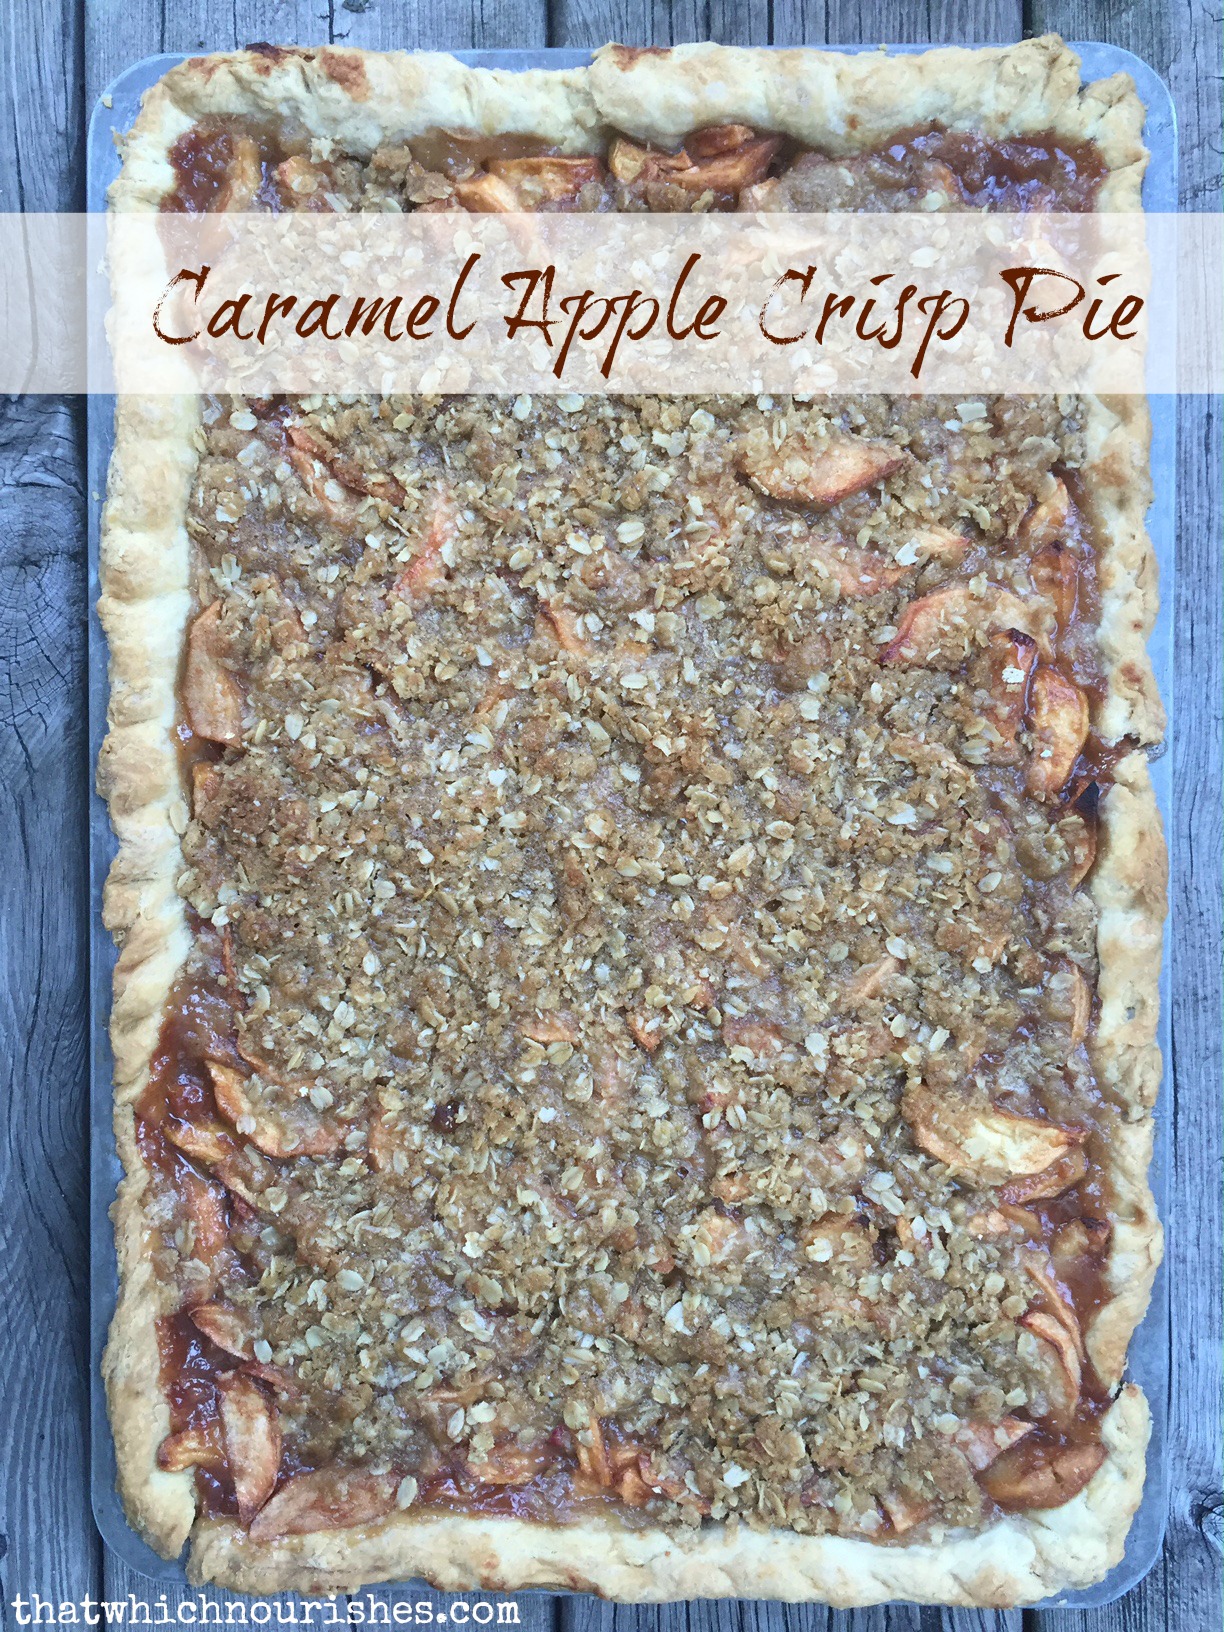 Caramel Apple Crisp Pie -- If Apple Crisp and Apple Pie had a baby and you smothered it with caramel or glaze, this would be the yummy baby | thatwhichnourishes.com